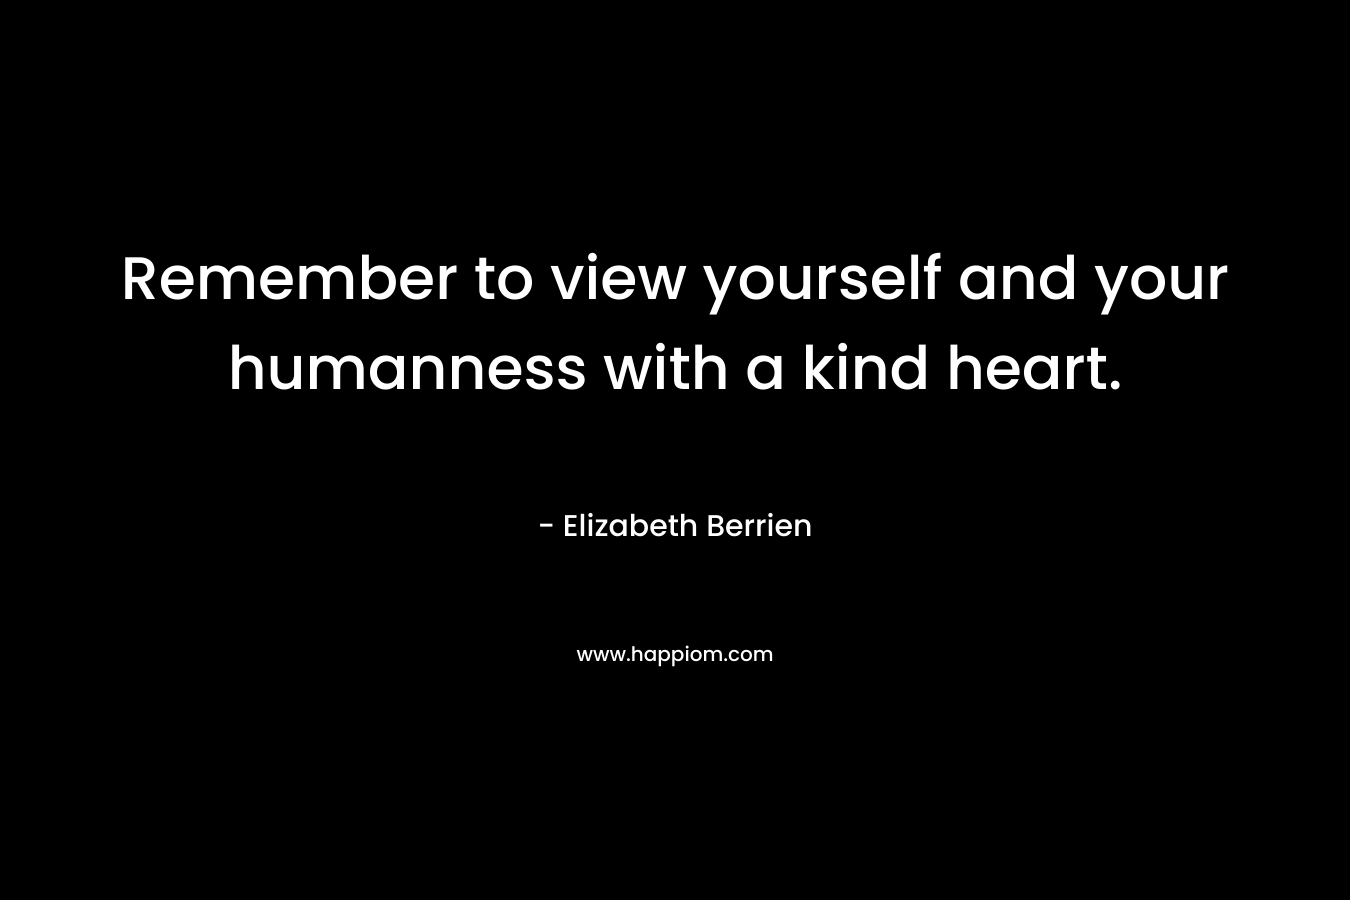 Remember to view yourself and your humanness with a kind heart. – Elizabeth Berrien